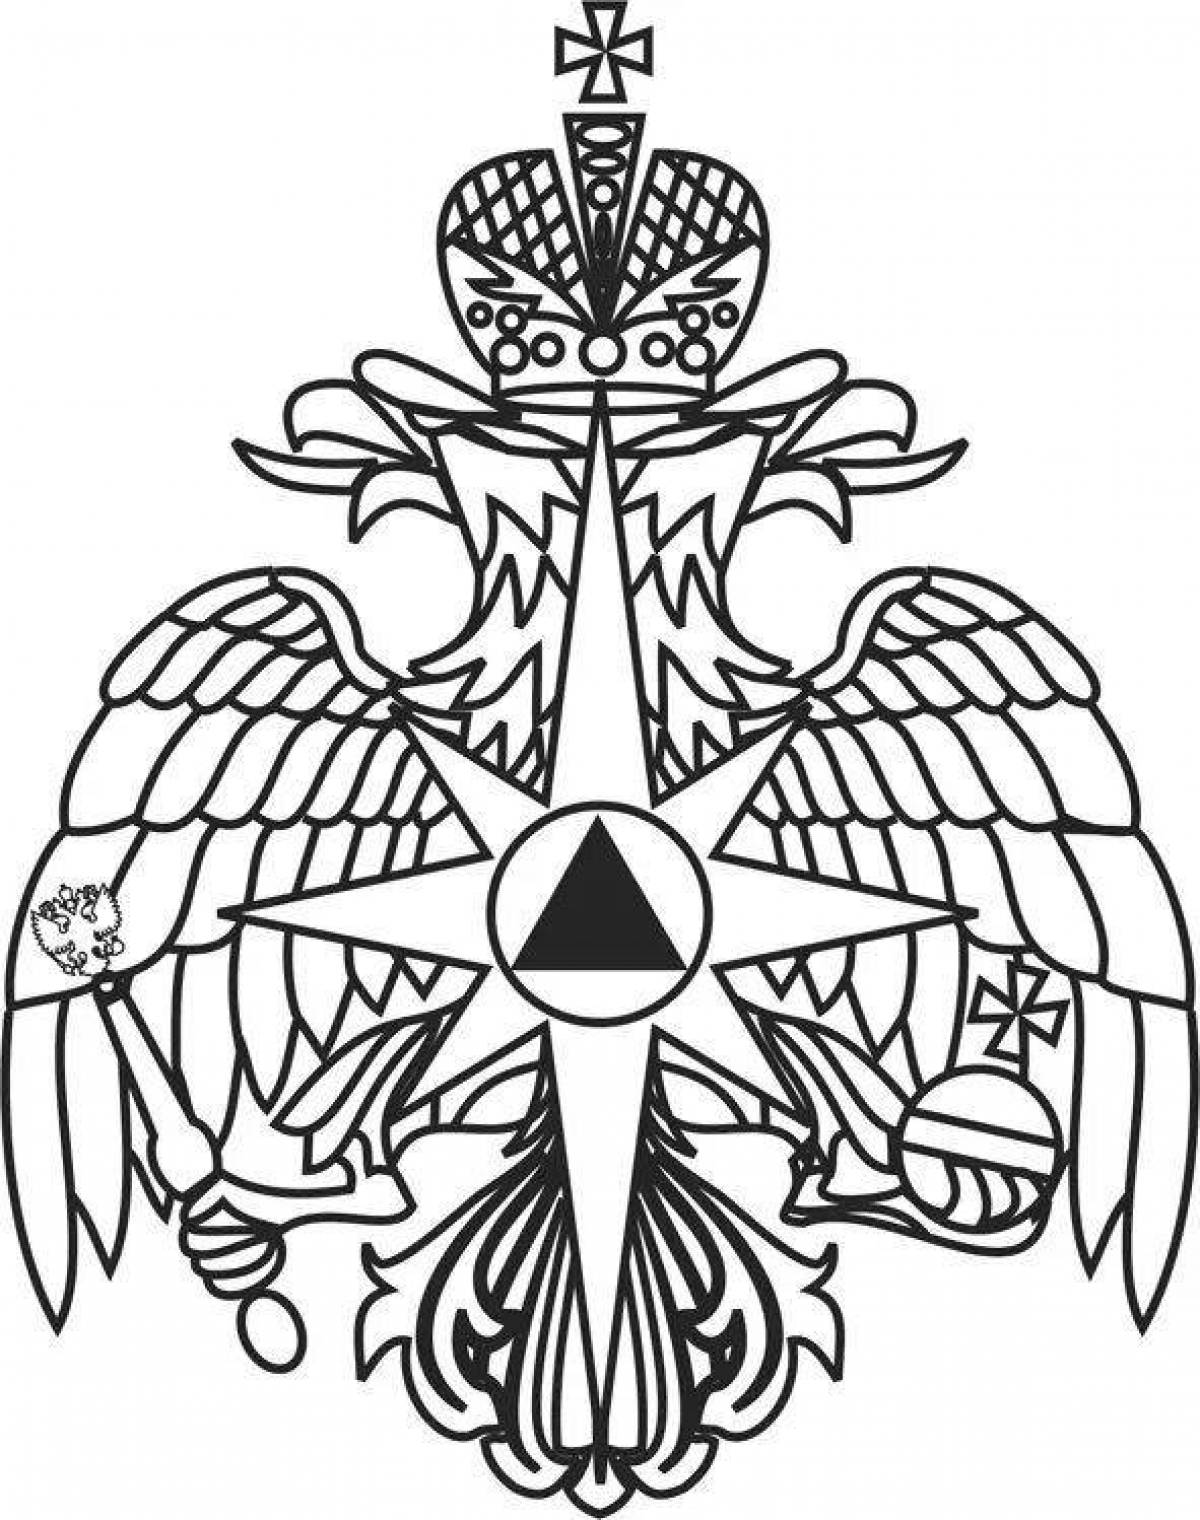 Coloring page tempting emblem of the Ministry of Emergency Situations